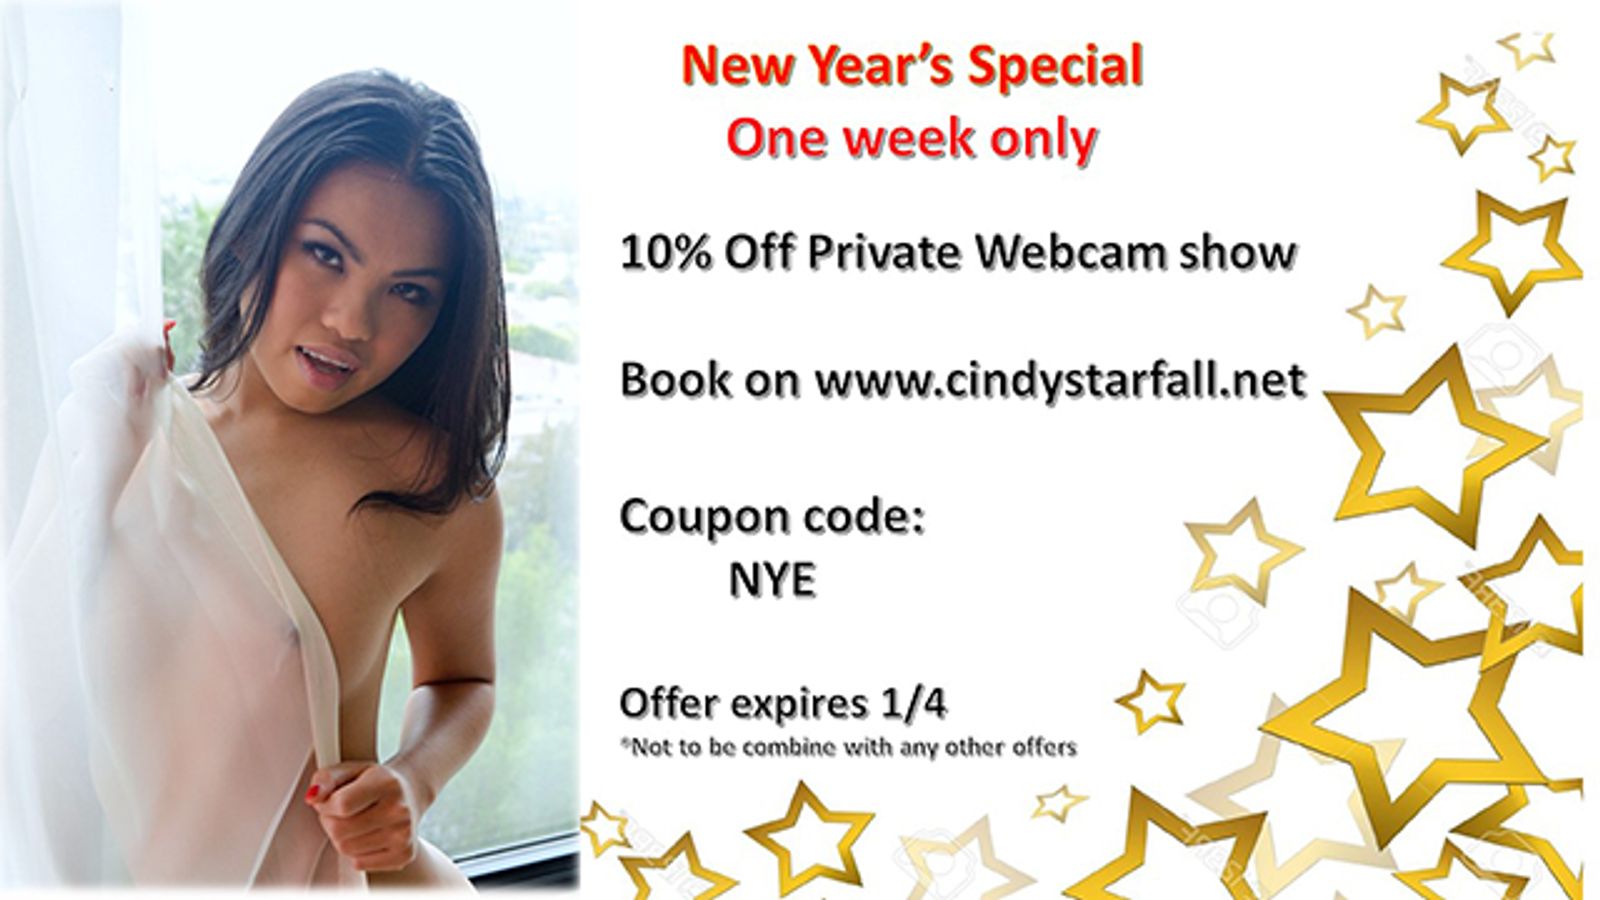 Cindy Starfall Celebrates The New Year With A Webcam Special